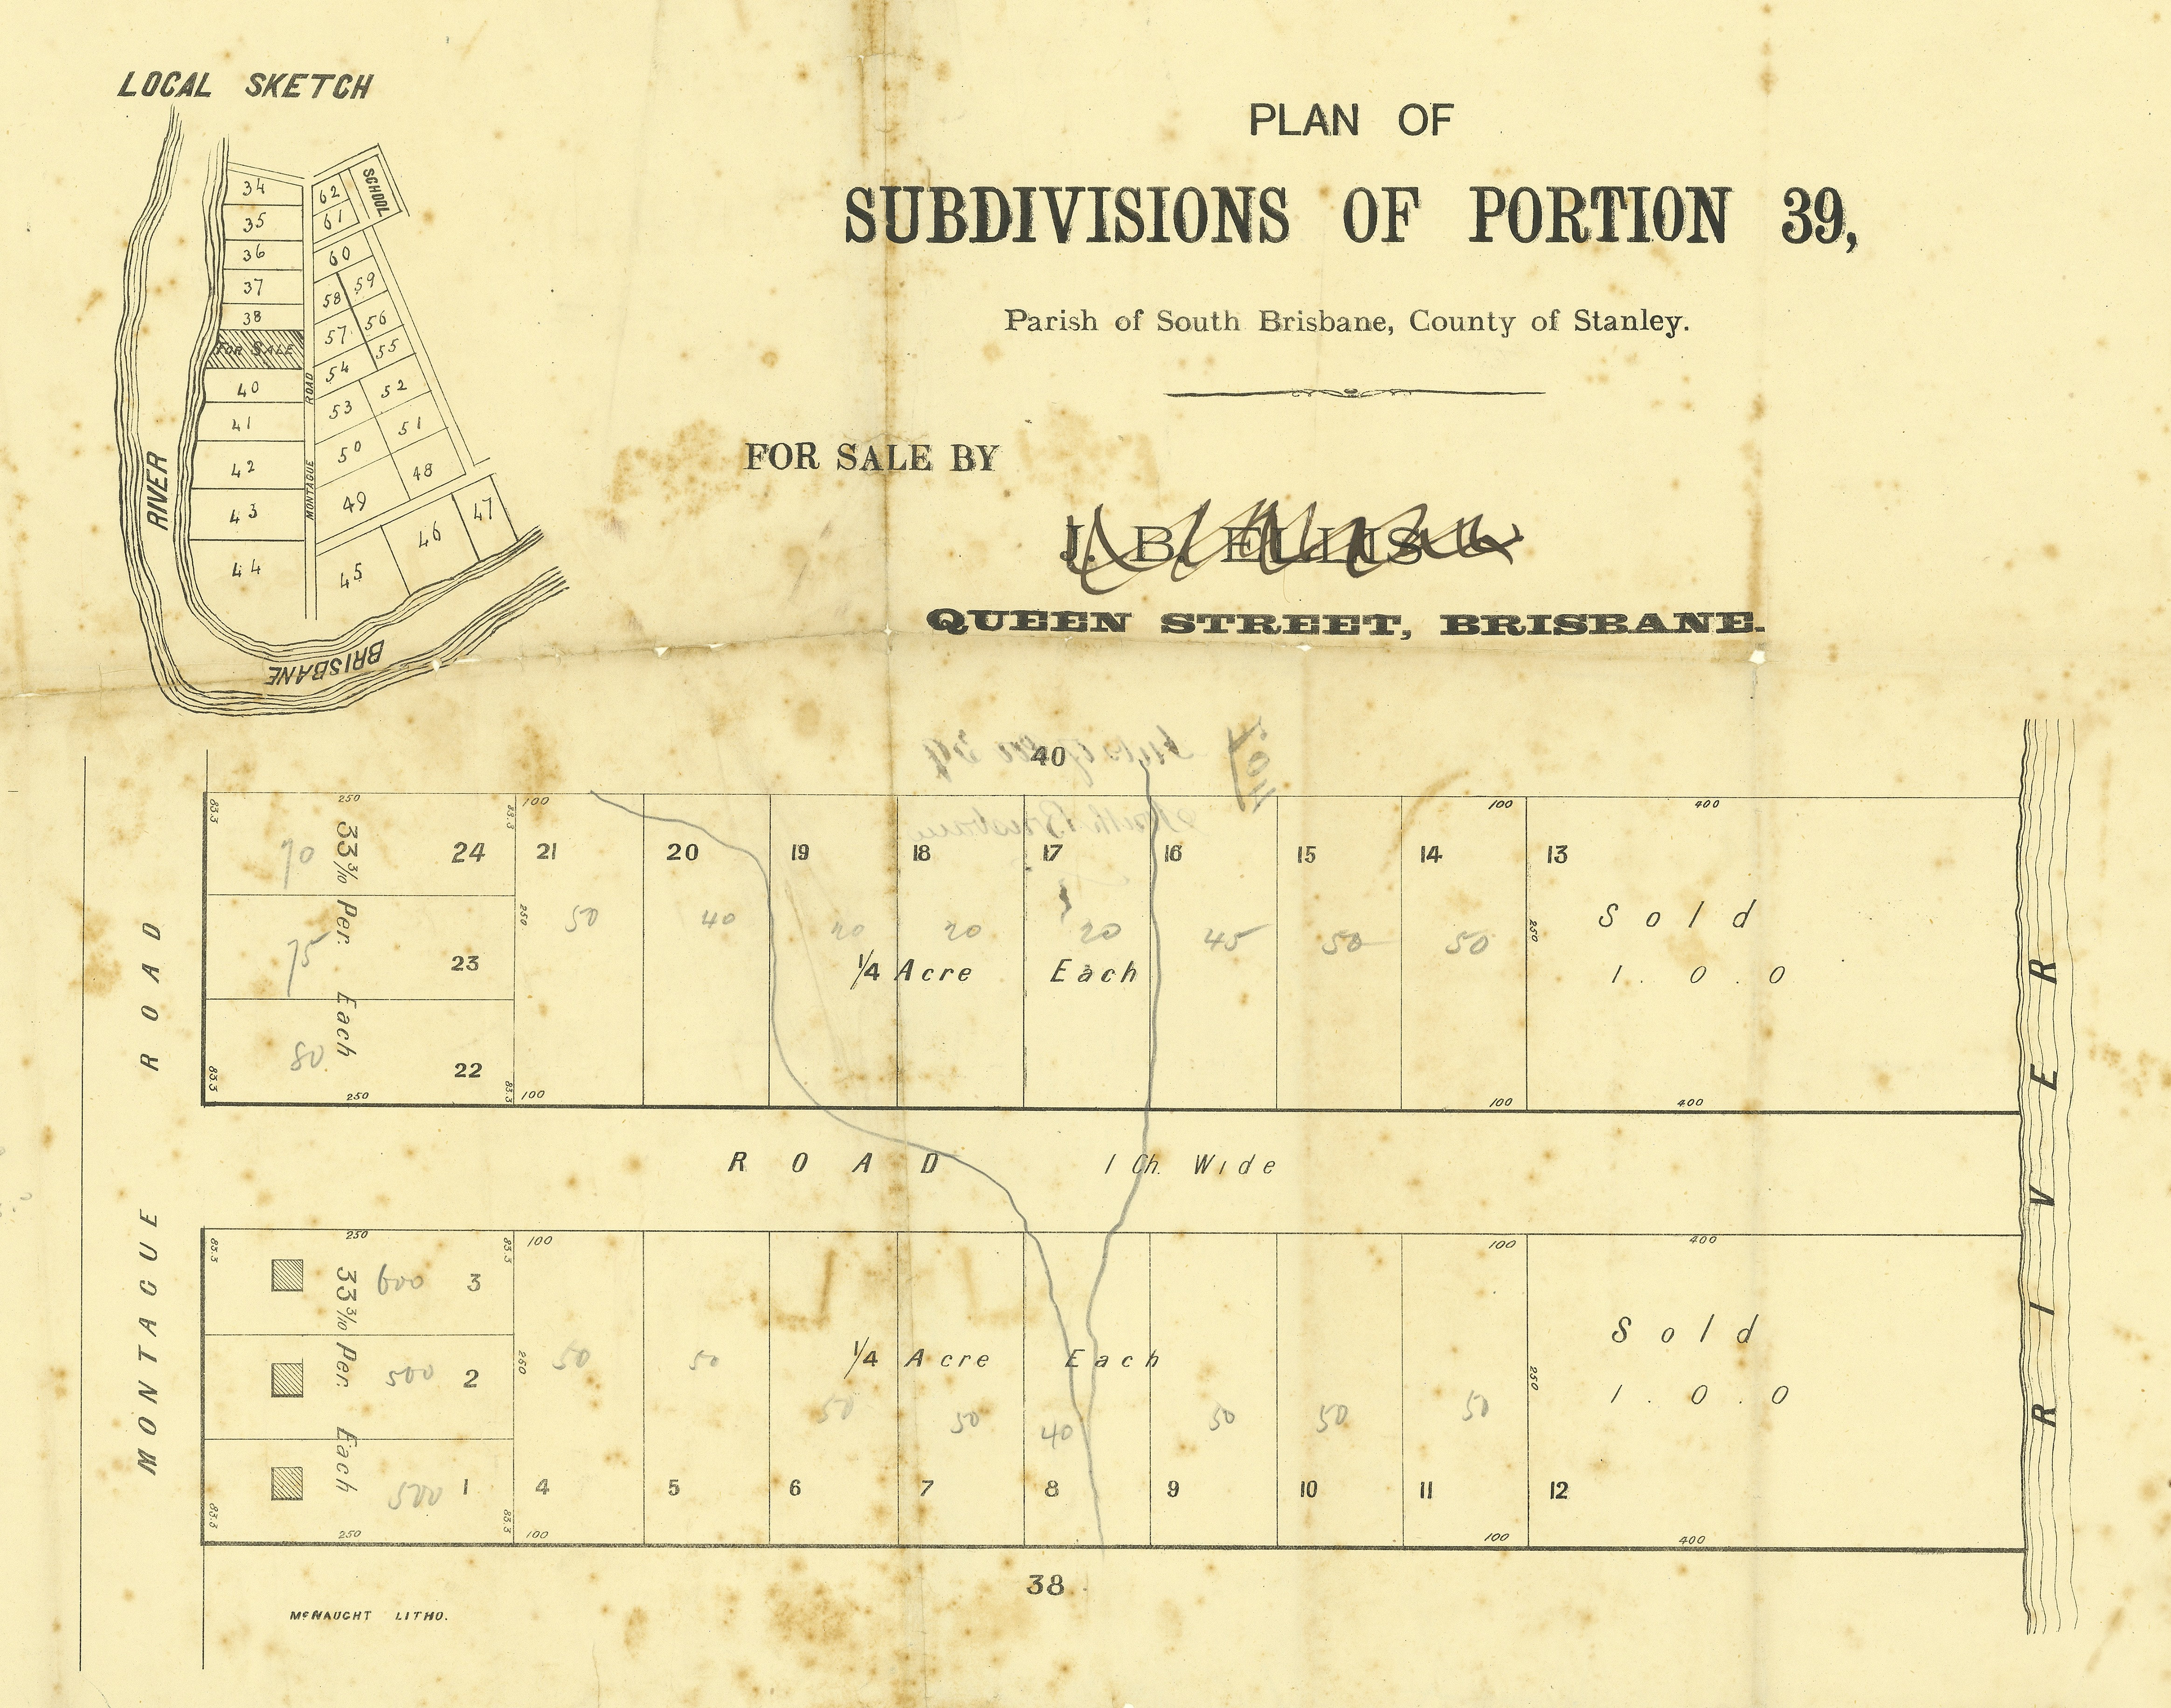 Plan of subdivisions of portion 39, parish of South Brisbane, county of Stanley